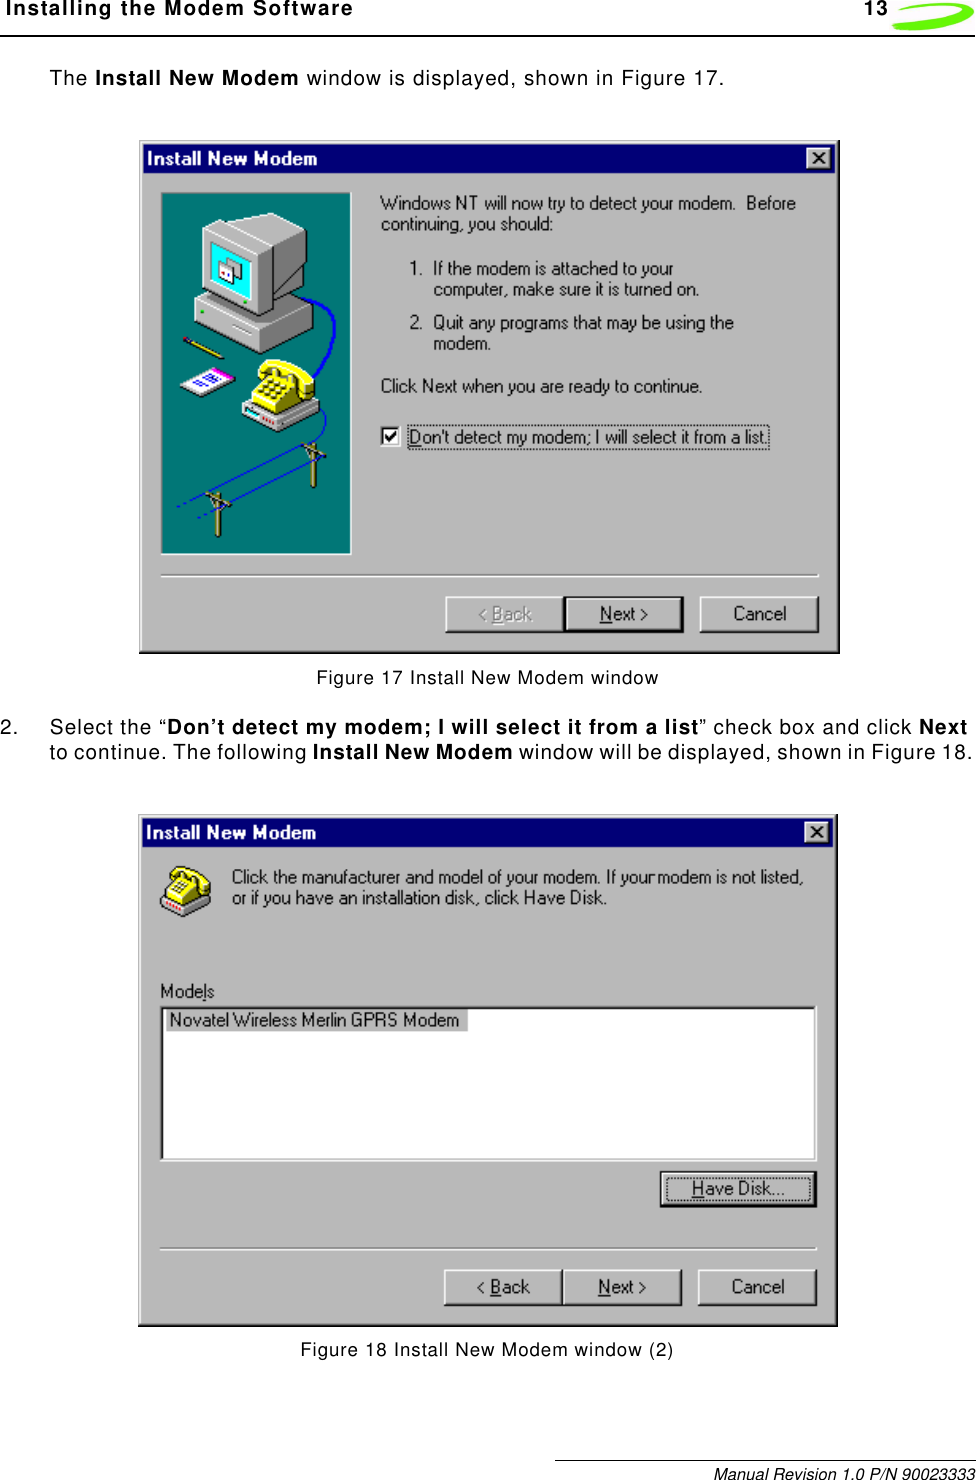  Installing the Modem Software 13Manual Revision 1.0 P/N 90023333The Install New Modem window is displayed, shown in Figure 17.Figure 17 Install New Modem window2. Select the “Don’t detect my modem; I will select it from a list” check box and click Next to continue. The following Install New Modem window will be displayed, shown in Figure 18.Figure 18 Install New Modem window (2)